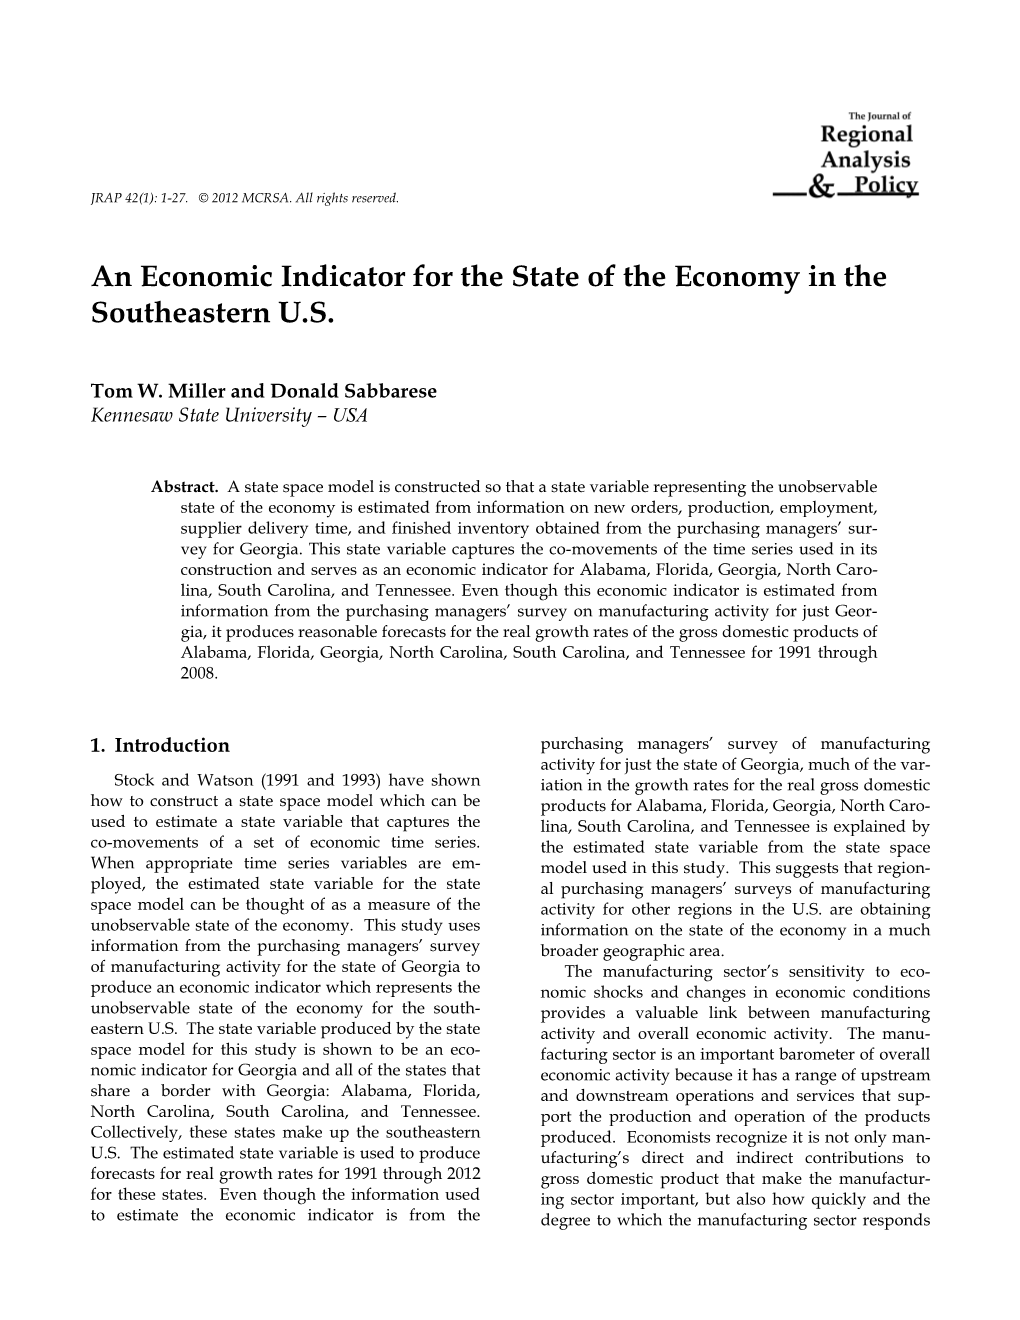 An Economic Indicator for the State of the Economy in the Southeastern U.S